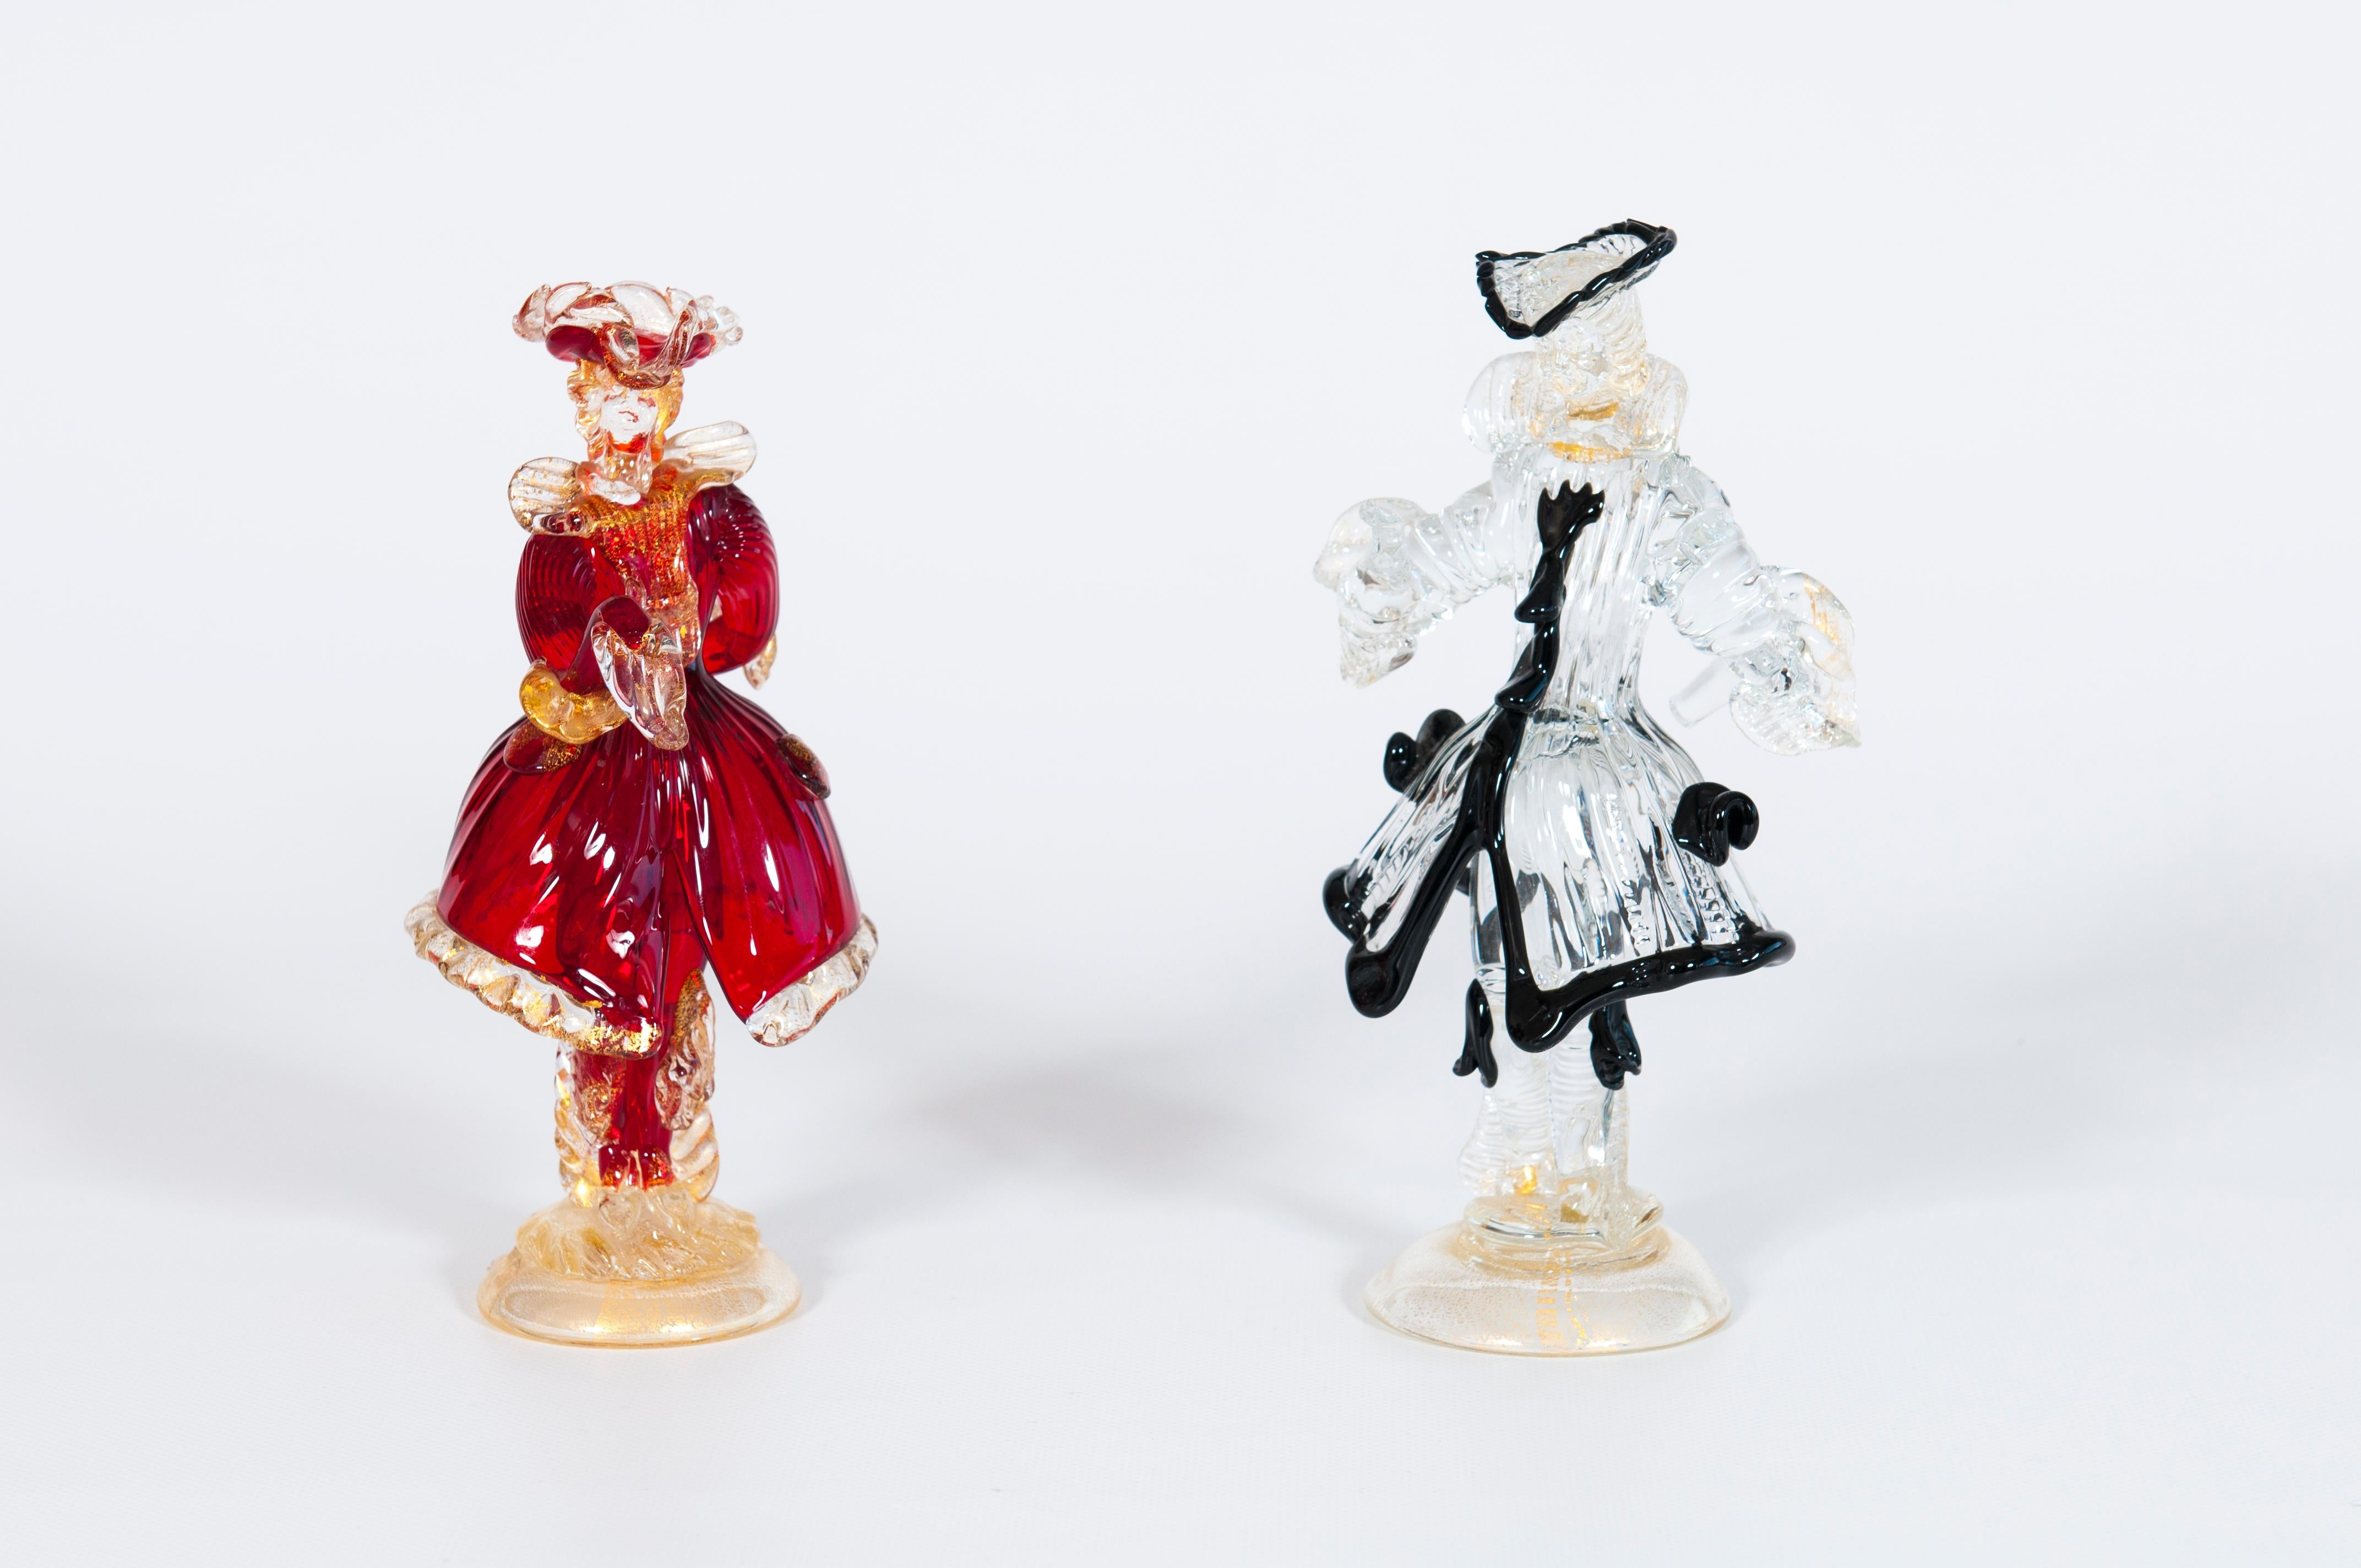 Beautiful Venetian lady and gentleman in ruby-red and black, with gold finishes.
This amazing Venetian set is composed of a lady and a gentleman in ruby-red glass with details in black and gold. These refined glass sculptures were entirely handmade